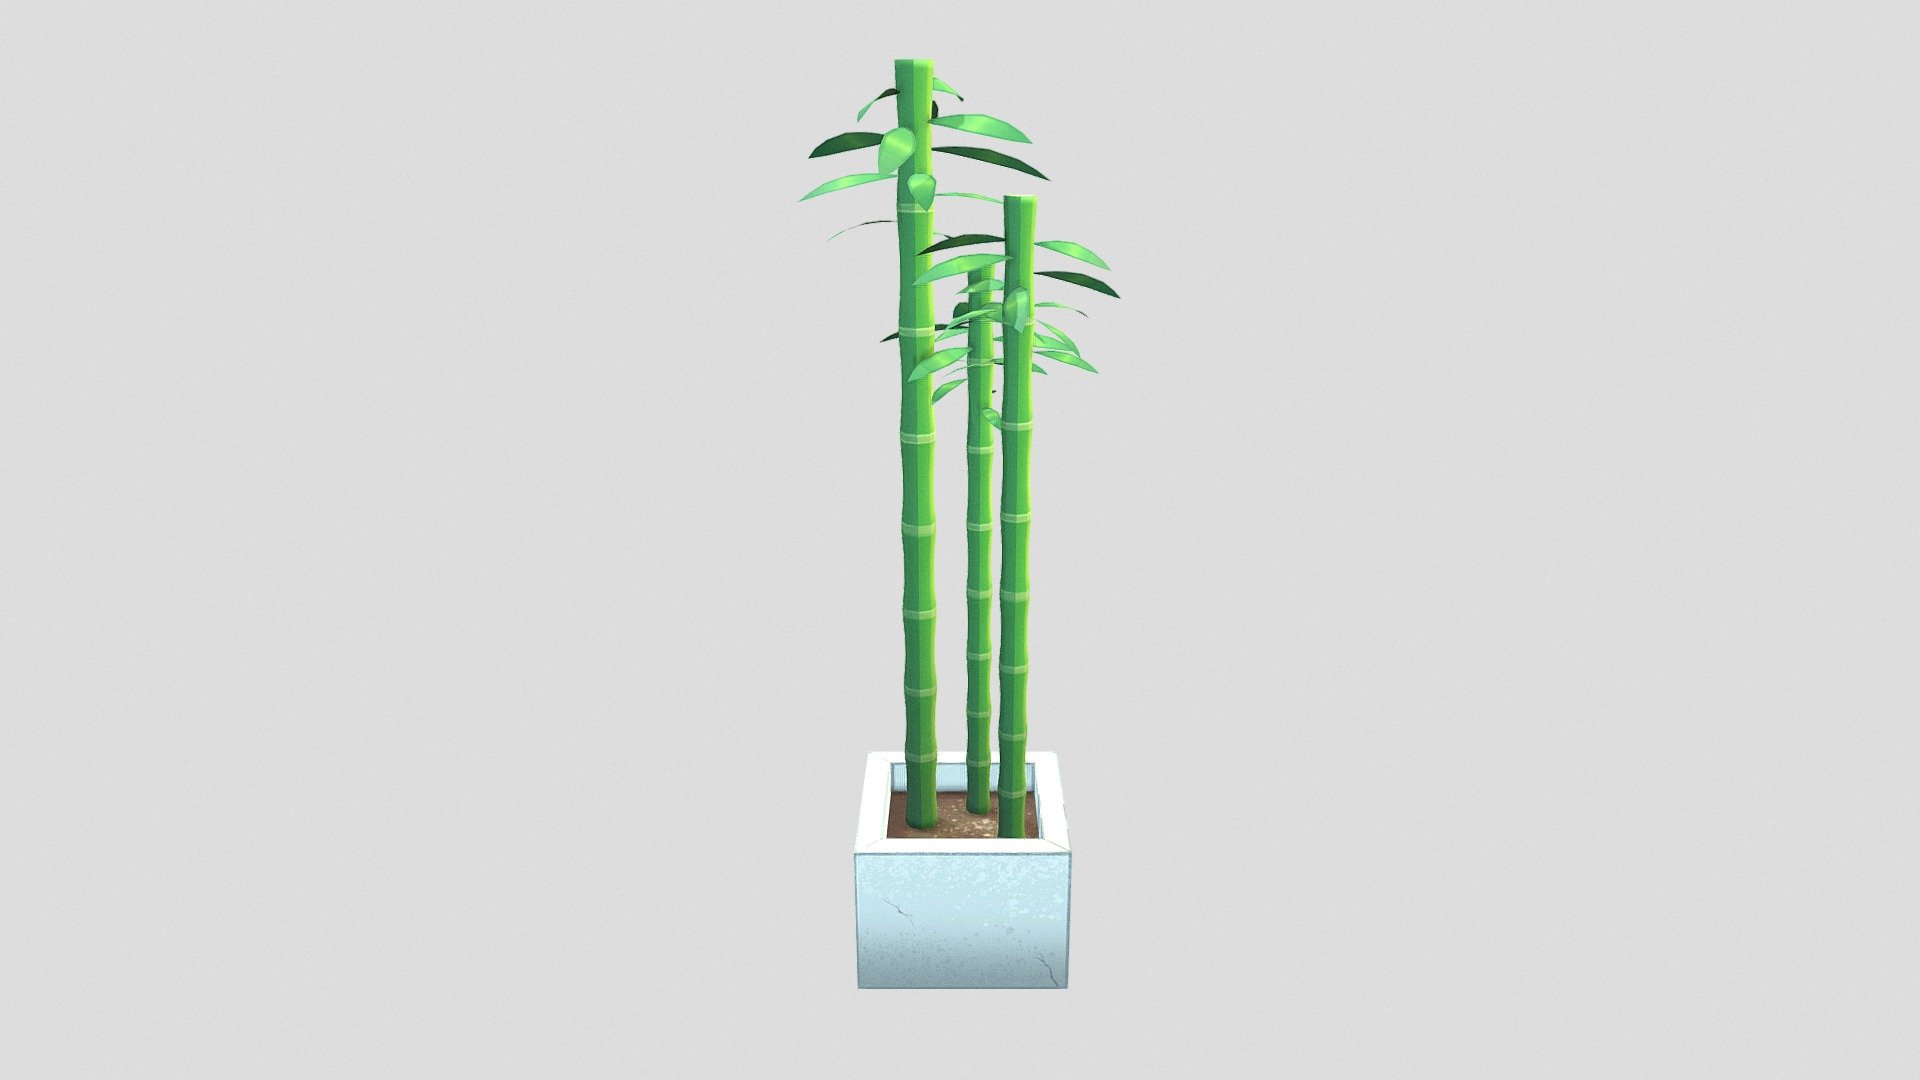 A VERY VBEAUTIFUL BABMBOO PLANT, PERFECT FOR YOUR DREAM HOME. ITS LONG SHAPE MAKES THIS PLANT PERFECT TO SQUEEZE INTO EMPTY CORNERS AND TO GIVE THEM SOME GREEN.

THIS PLANT HAS THREE TALL BEAUTIFUL BAMBOOS WHICH ALL STAND TALL AND GLORIOUS. THE POT IS A BEUTIFUL GREY STONE WITH A COUPLE CRACKS VISIBLE WHICH ADDS DIMENSION TO IT.
THE BAMBOO IS DECORATED WITH BEAUTIFUL LEAVES WHICH MAKES THE PLANT BOTH BEAUTIFUL AND ELEGANT.

HOW DO YOU GET YOUR HANDS ON THIS WONDERFUL AND SPECTACULAR PLANT, YOU MAY ASK. WELL, THAT WILL NOT BE EASY.
YOU SEE, I DIDN'T SPEND ALL THIS TIME, STRUGGLING, WITH BLOOD, SWEAT AND TEARS, TO MAKE THIS MODEL. TO ACCUIRE THIS MODEL, YOU NEED TO DO A COUPLE OF TASKS.

FIRST TASK IS TO ACCUIRE THE CRYSTAL ORB. THE CRYSTAL ORB IS A POWERFUL RELIC WIELDED BY THE HALF UNICORN HALF WOLF HALF DEMONESS PRINCESS OF HELL, LUCY FURR, DAUGHTER OF LUCIFER, THE DEVIL HIMSELF.
TO ACCUIRE THIS CRYSTAL ORB YOU MUST WIN AND CONTROL IT AGAINST ITS WILL. ONCE YOU HAVE WON THE POWER OF THE CRYSTAL ORB YOU MUST - bamboo_plant - 3D model by i hate avocados (@ihateavocados) 3d model